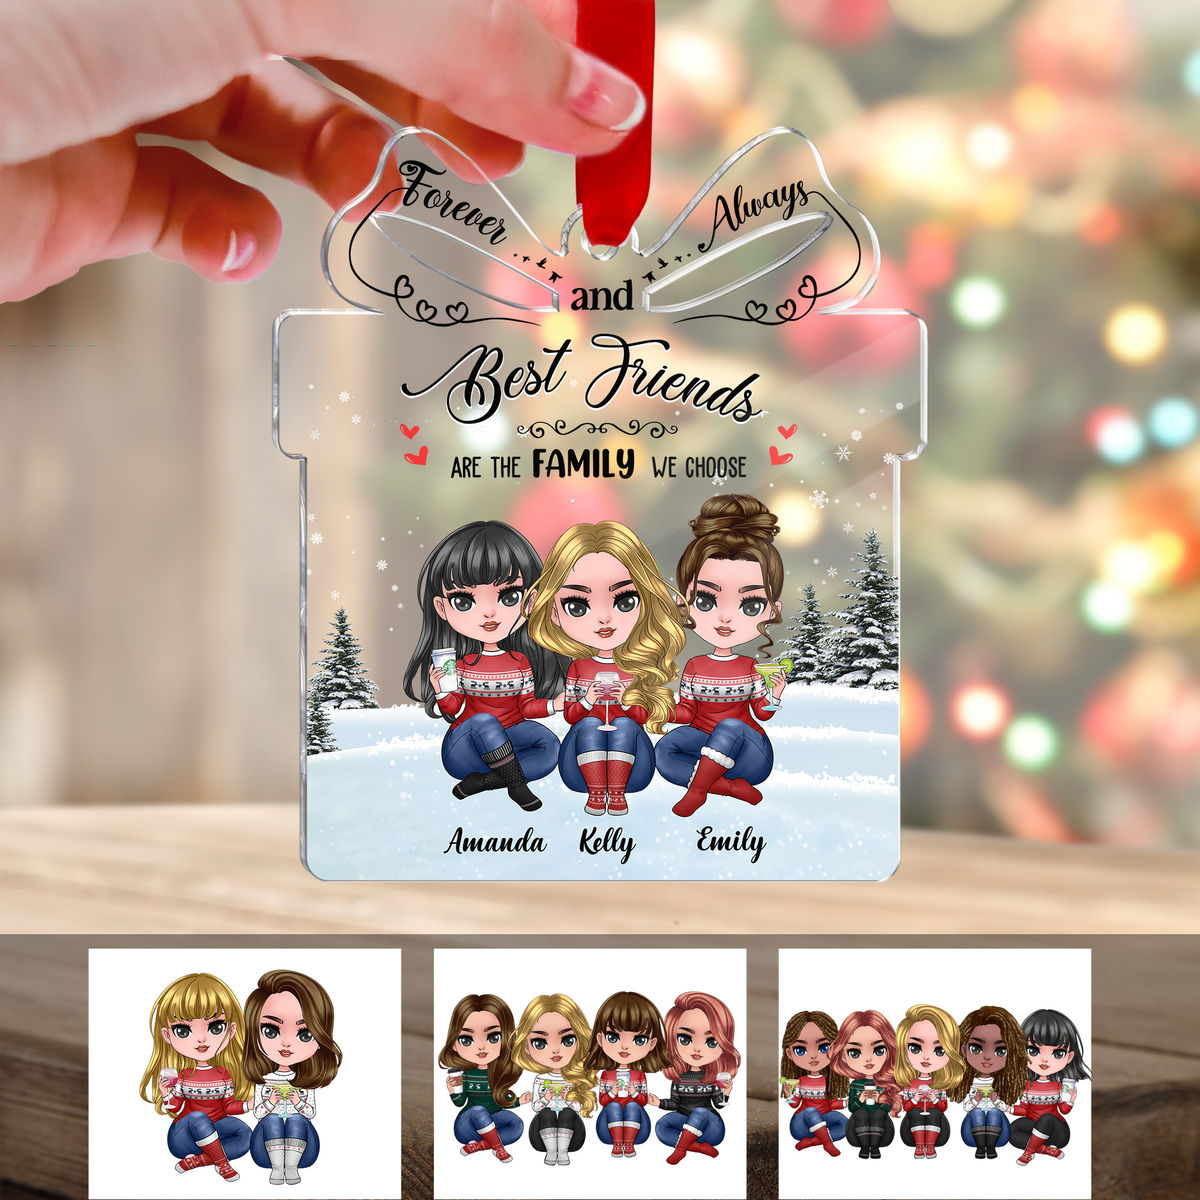 Friends - Best friends are the family we choose (Custom Gift - Shaped Acrylic Ornament)